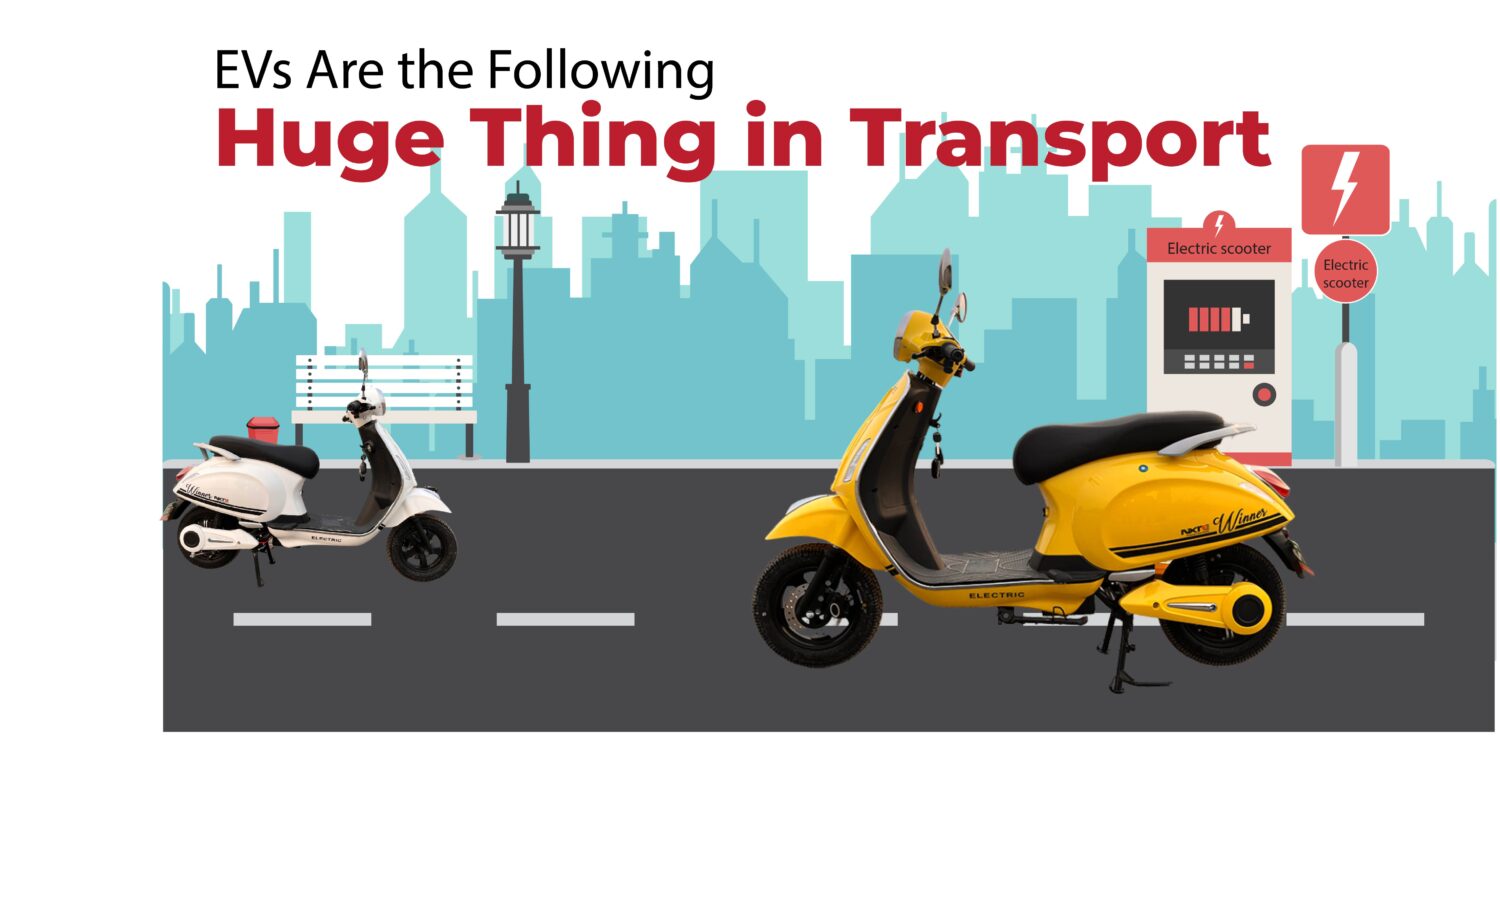 EVs are the following huge thing in transport